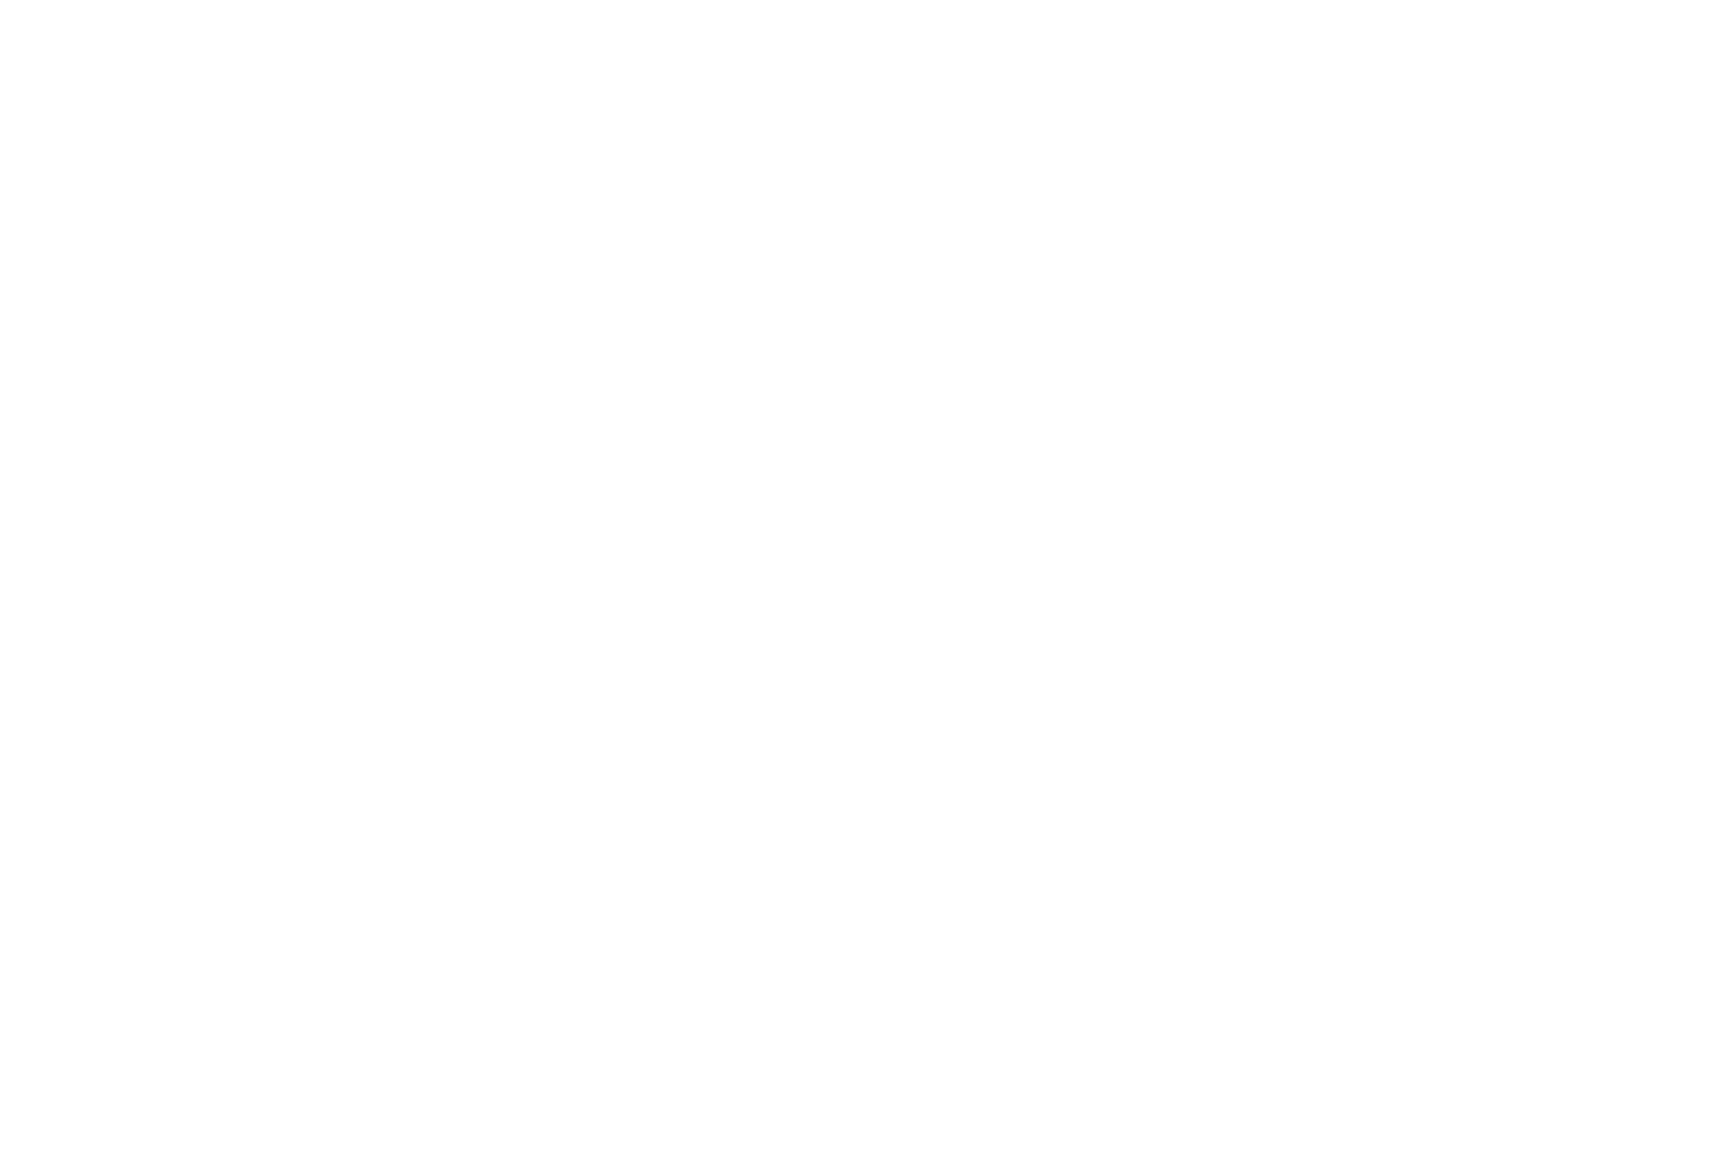 OFFICIAL SELECTION - Roma Green Film Festival - 2021